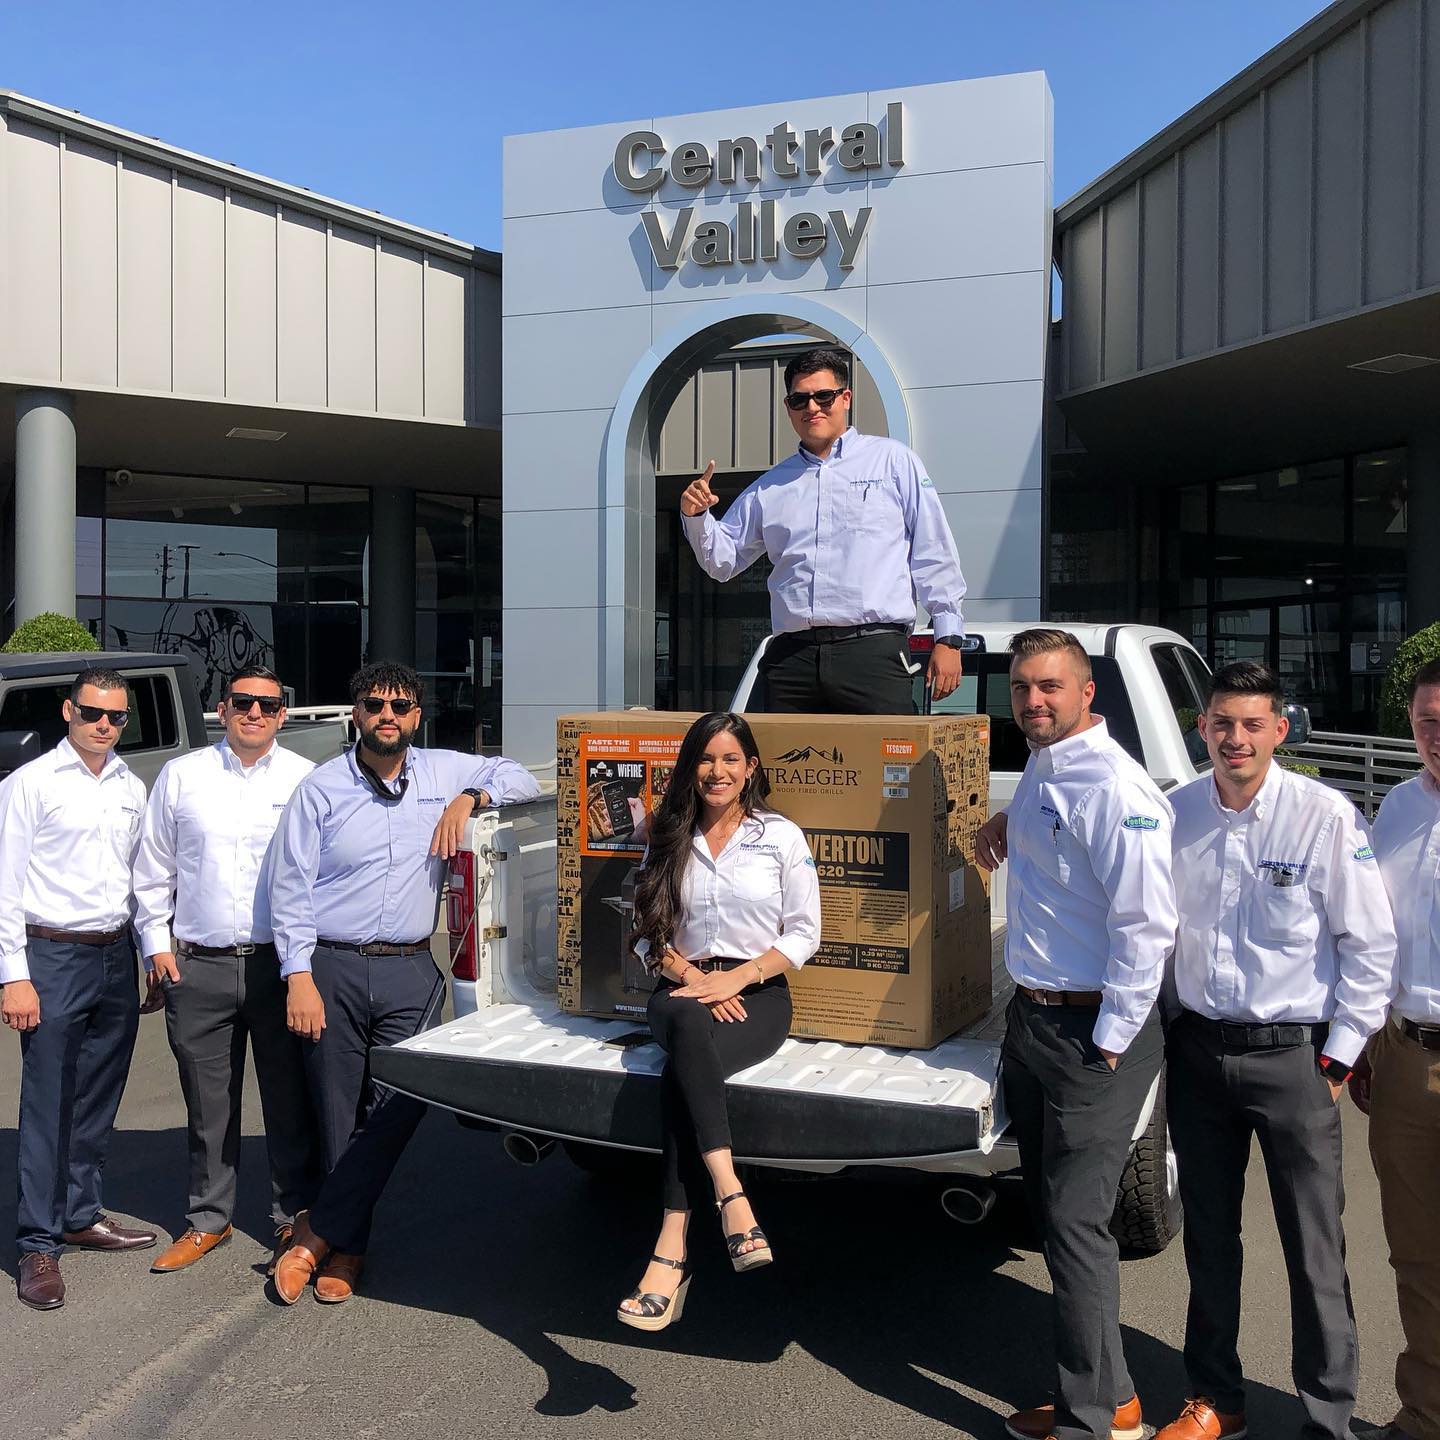 Radiant Ride and Auto Butler congratulates Hector Hermosillo for being top producer of our Summer Blitz sales contest at Central Valley Automotive Group in Modesto, CA. Big thanks to Brent Gardner and all sales associates for the support and participation! @centralvalley.cjdr